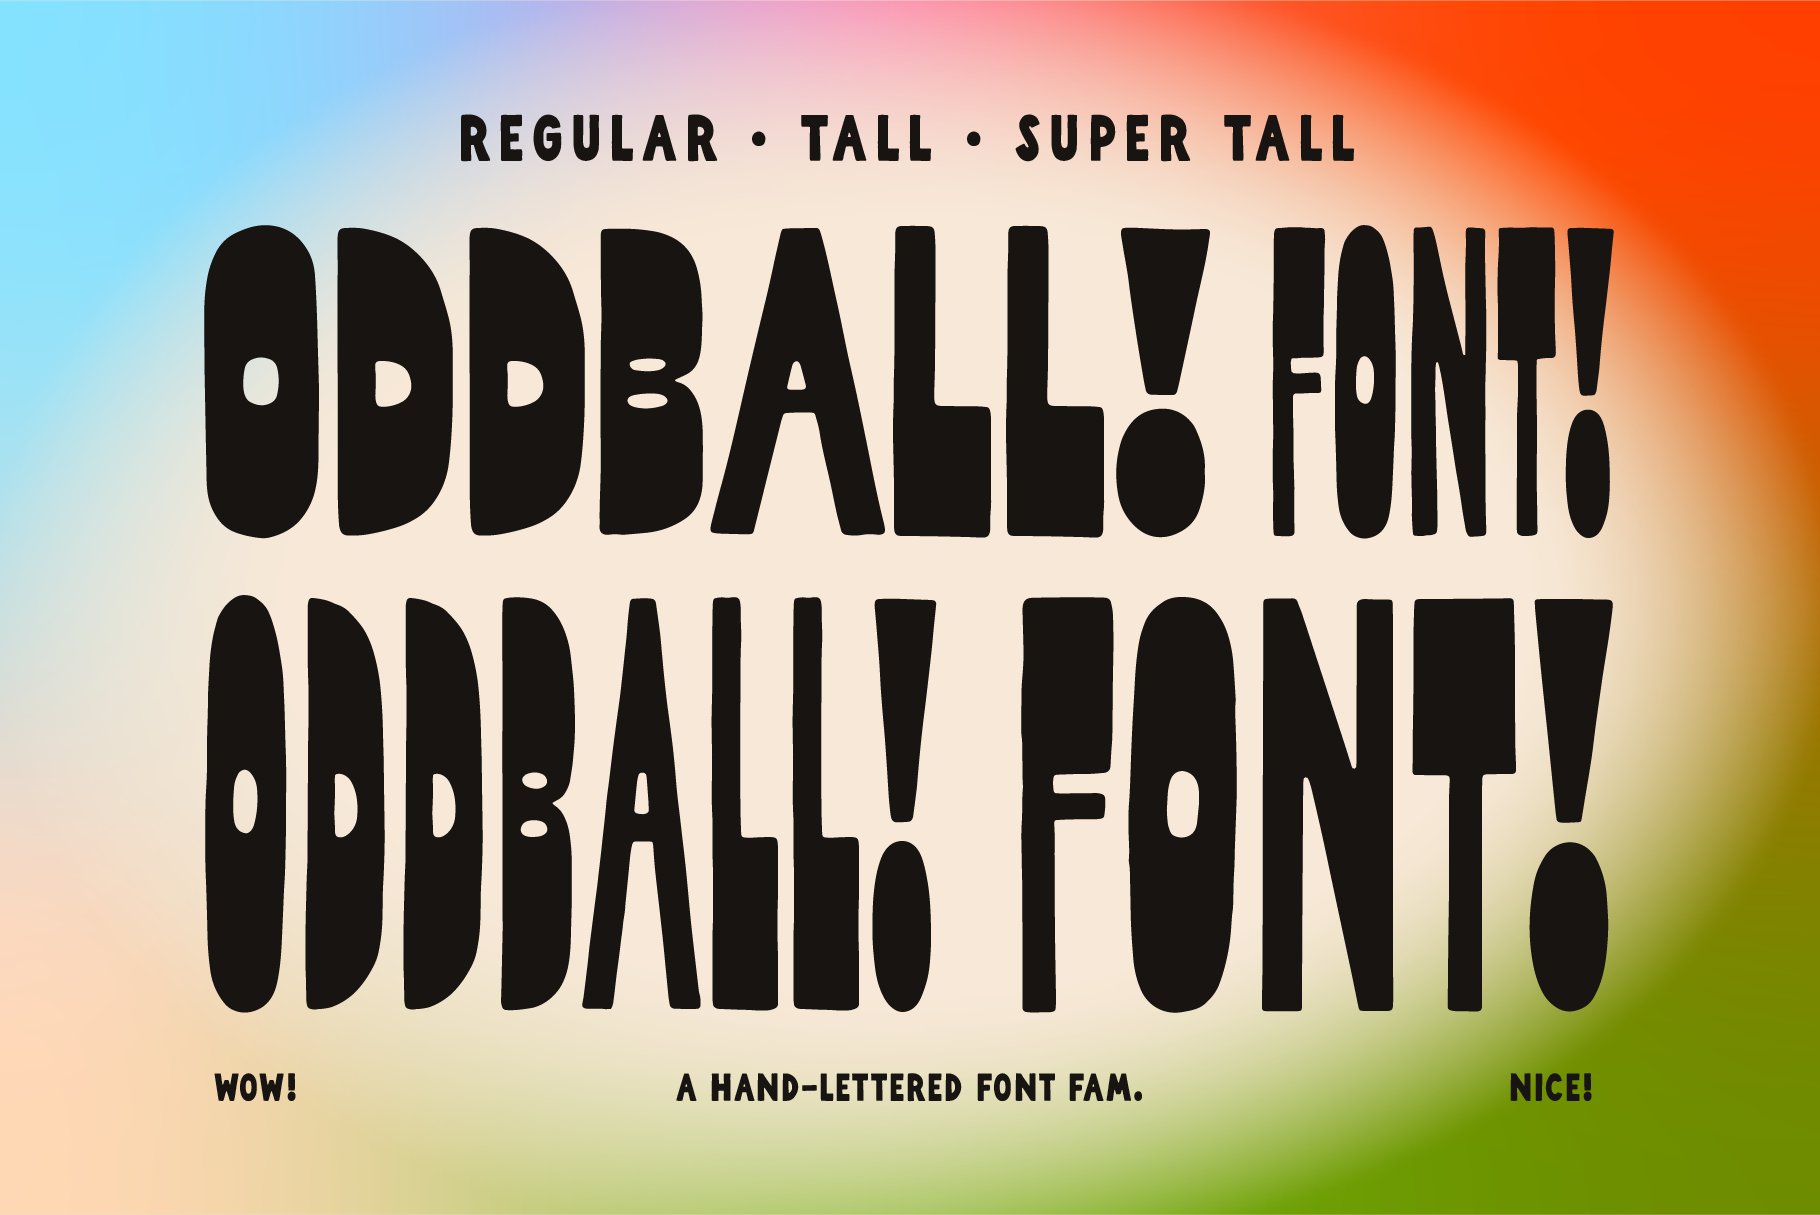 Oddball Font Collection! Hand-drawn! cover image.